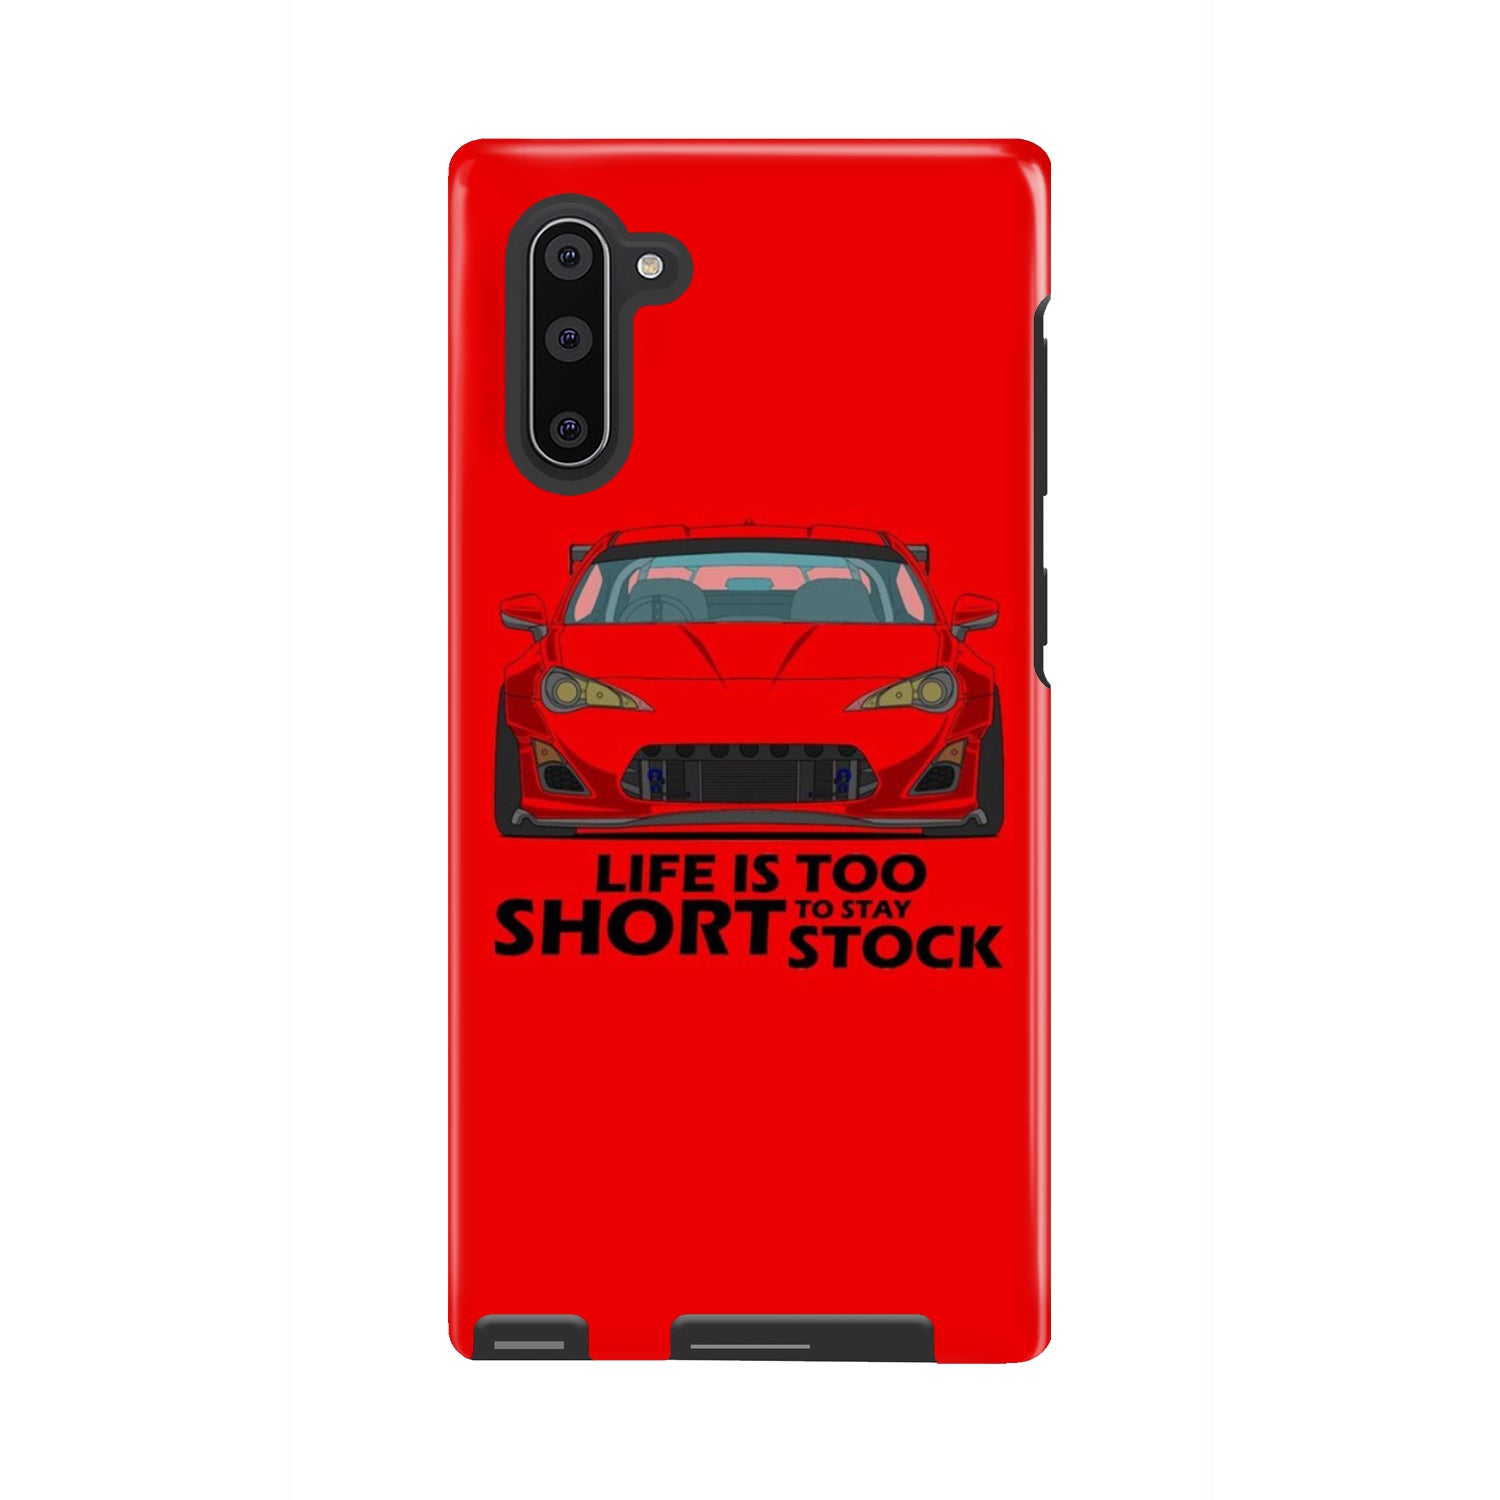 Life is too short to stay stock Phone Case